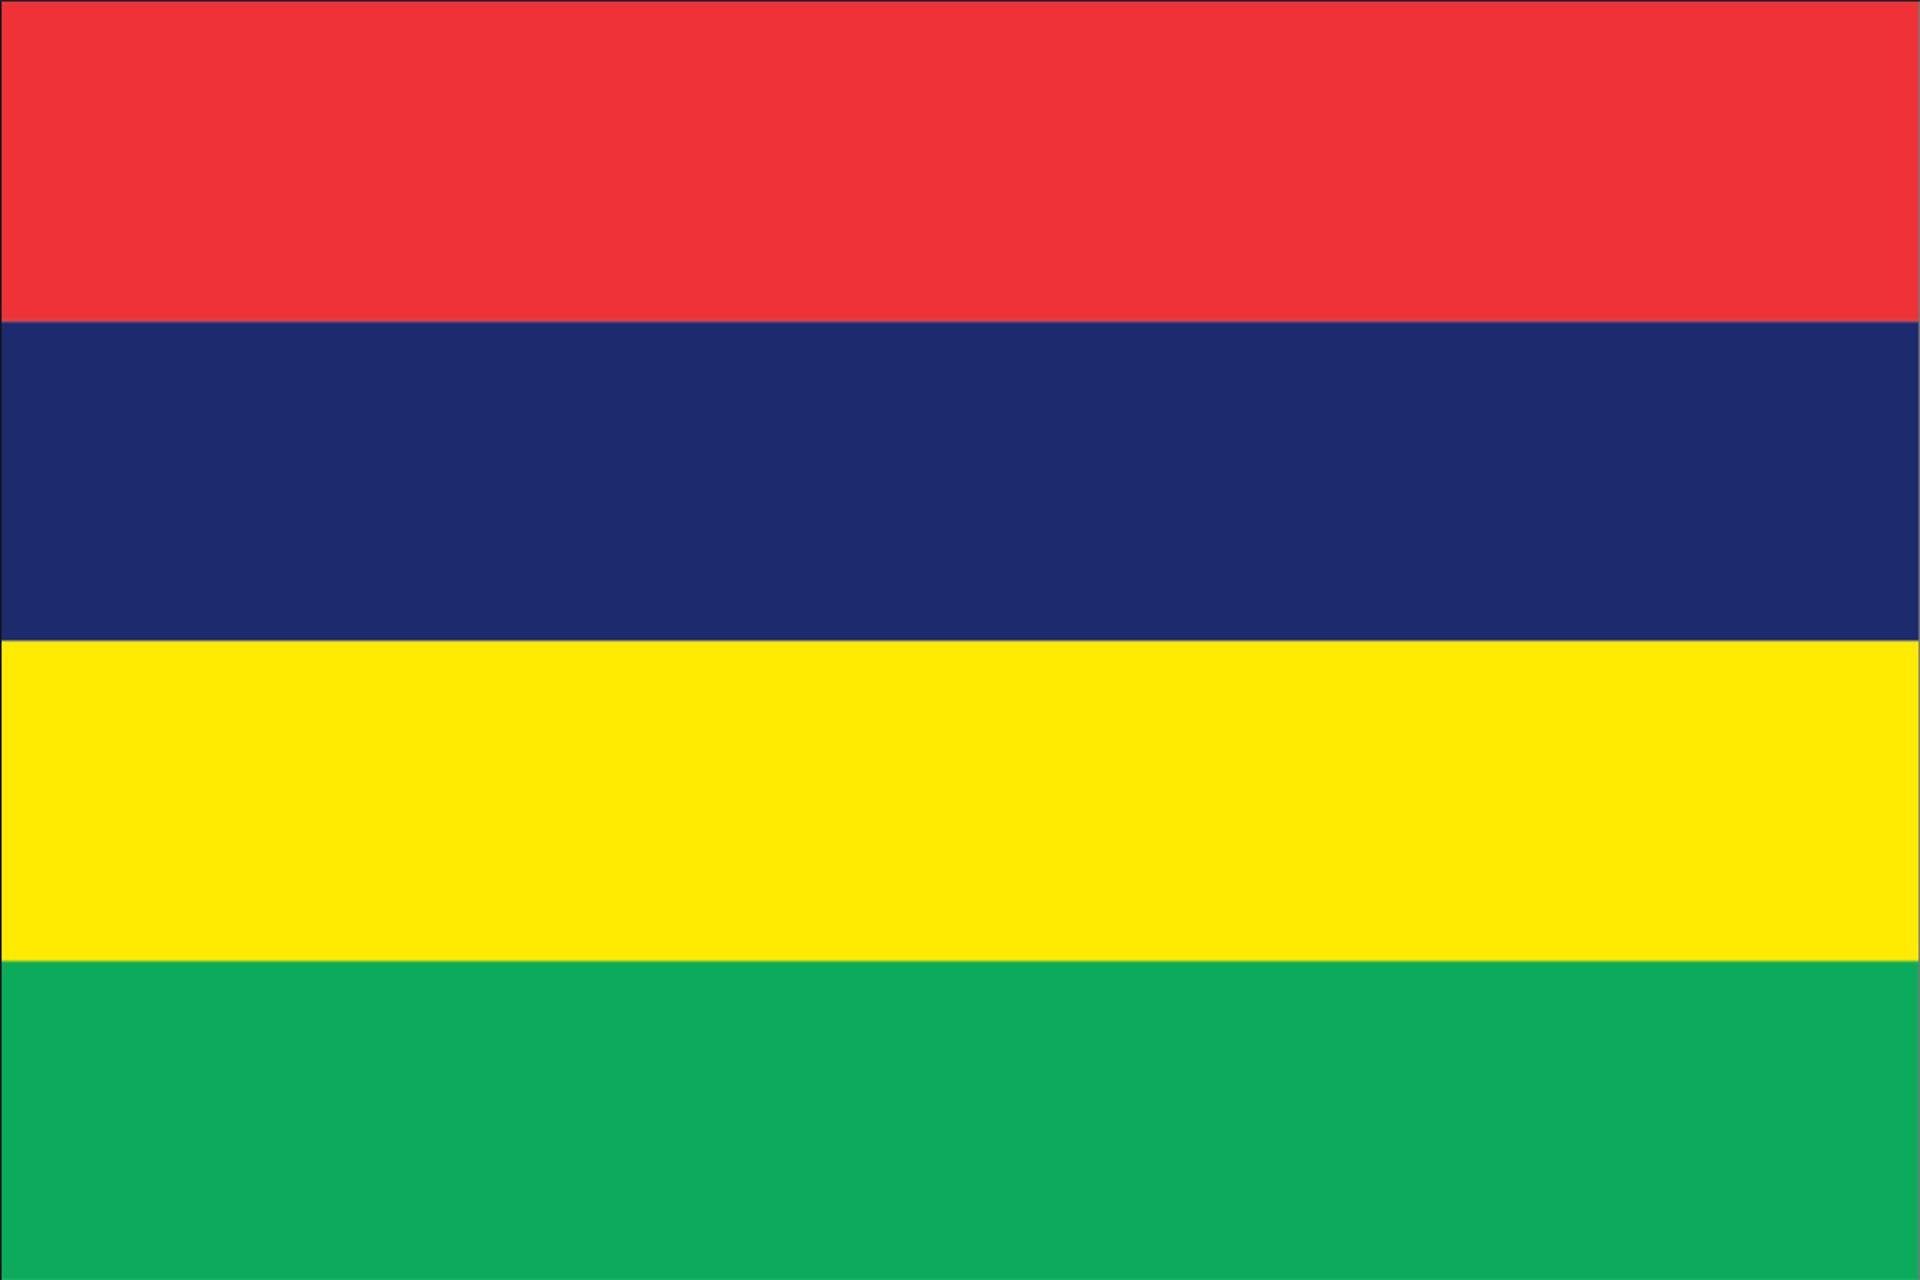 flaggenmeer Flagge Querformat g/m² 160 Mauritius